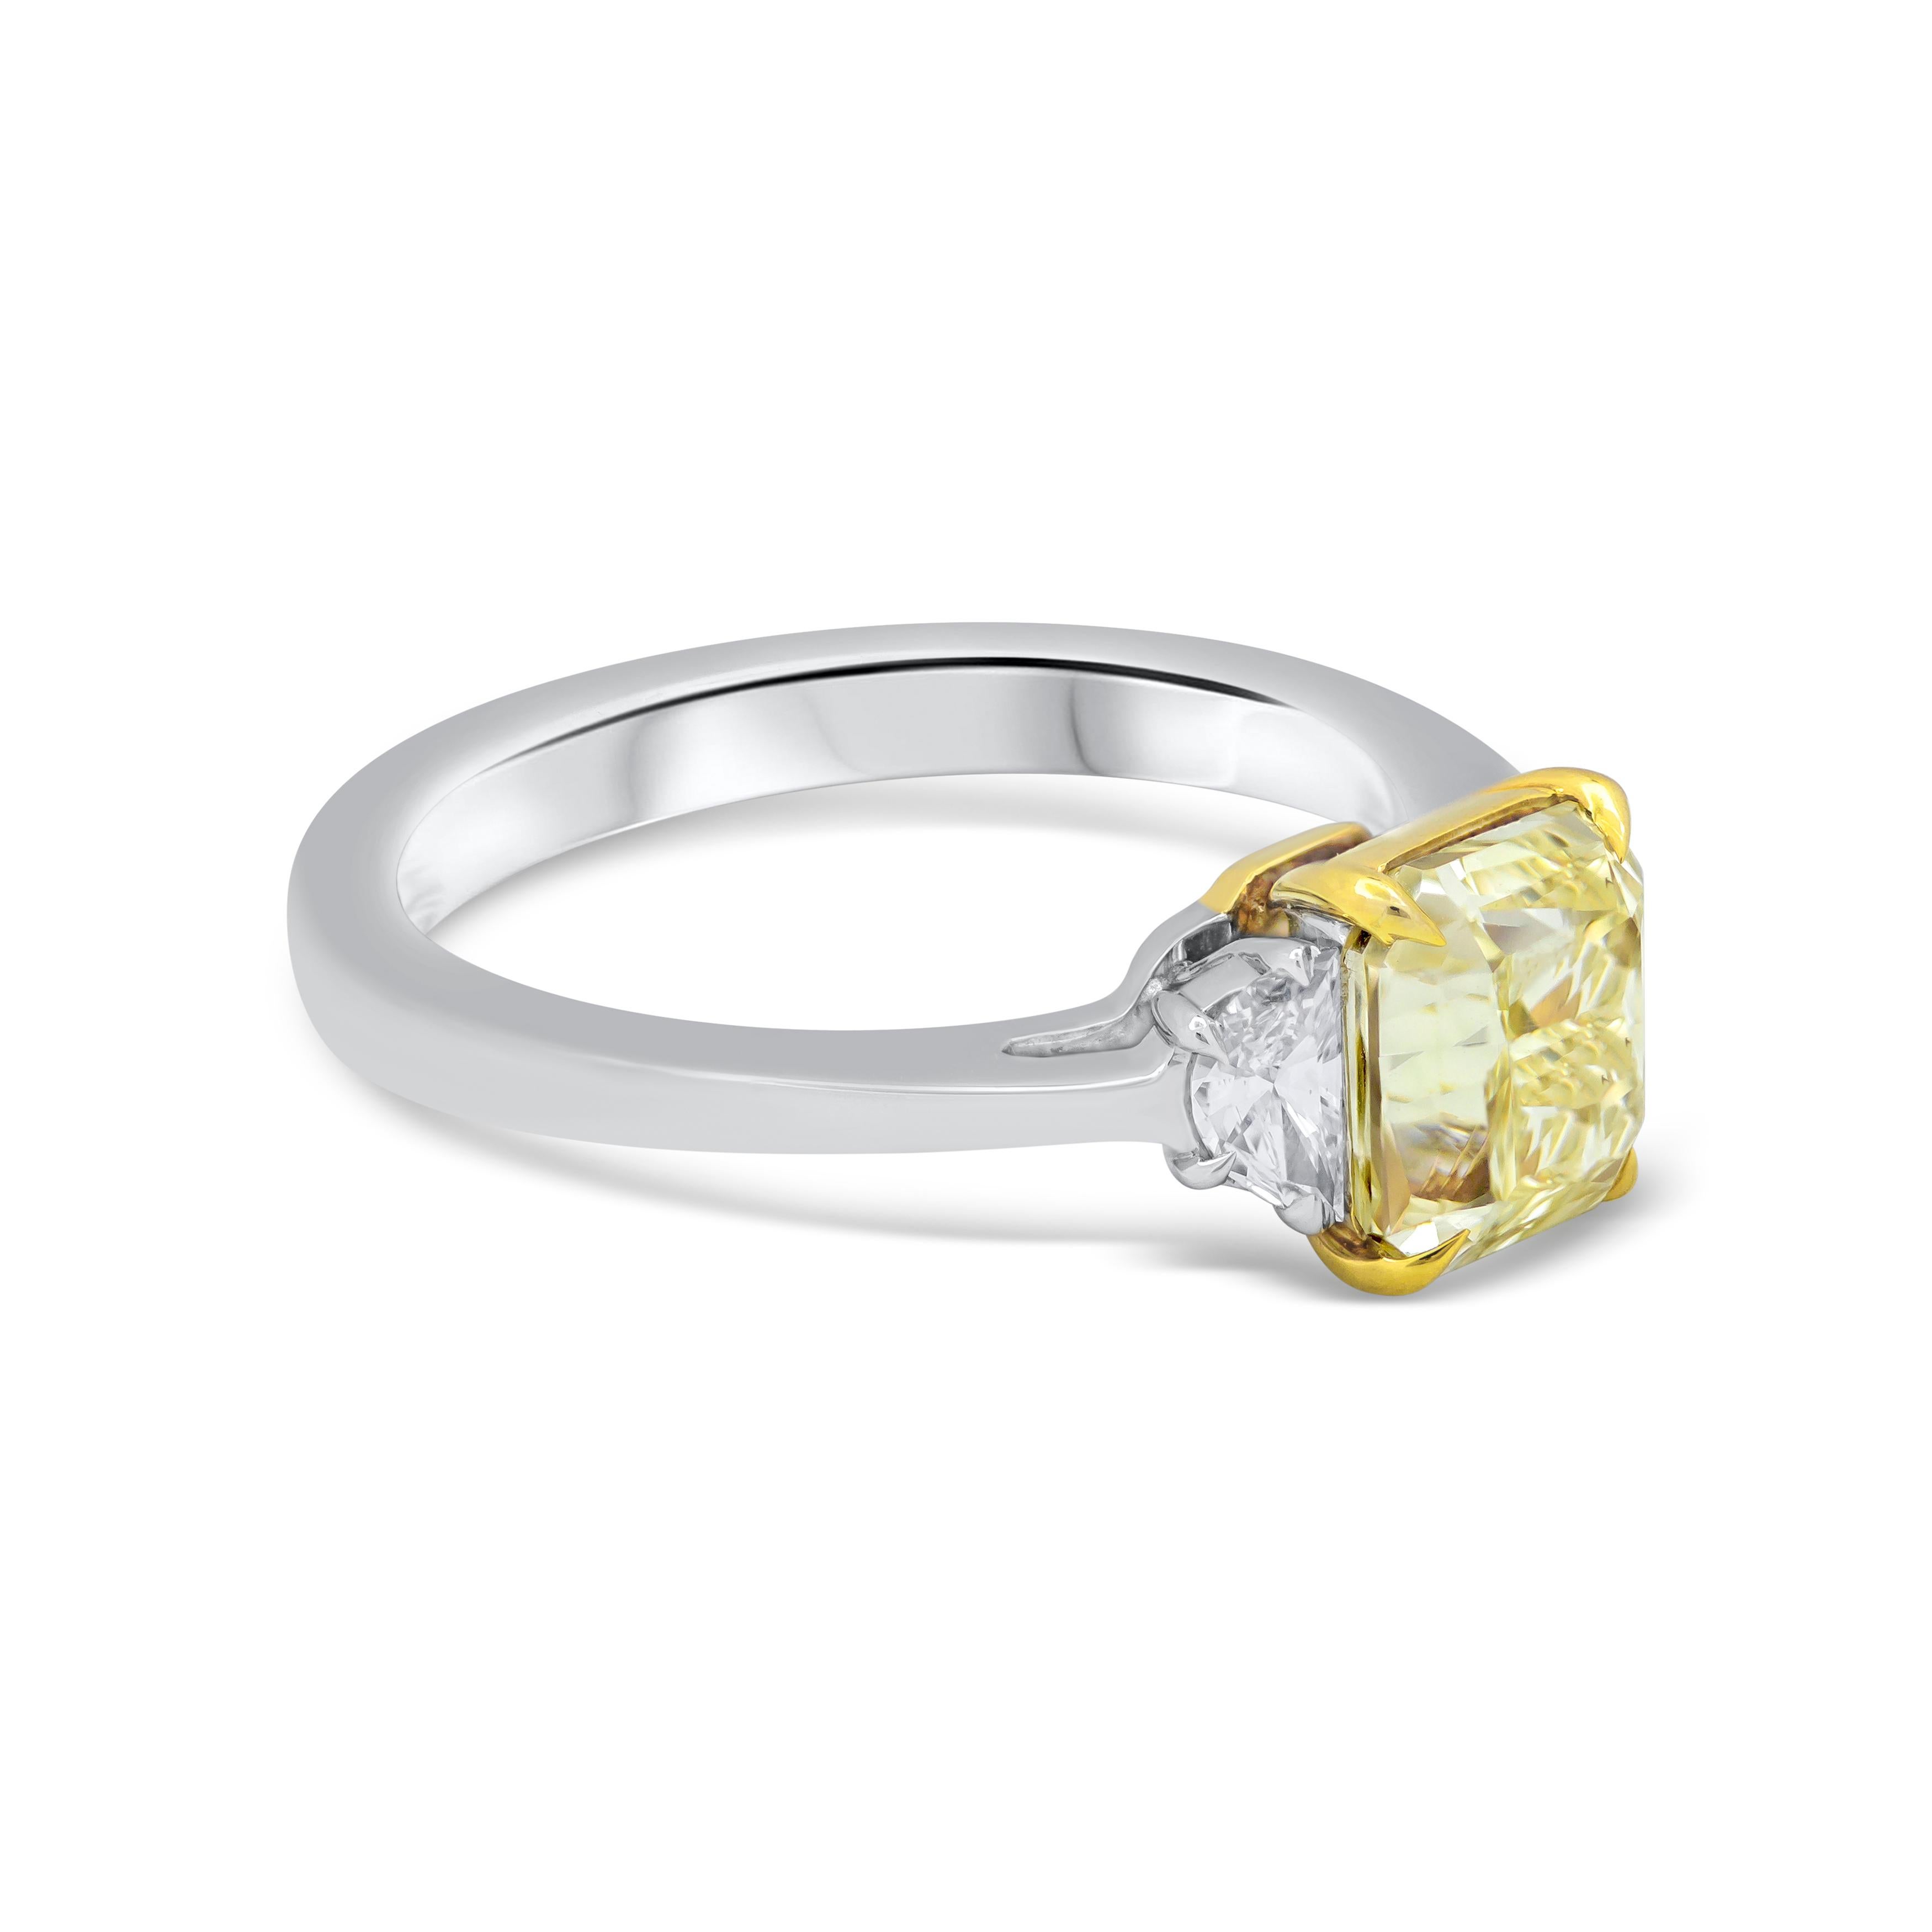 A simple and chic engagement ring features a 2.02 carats radiant cut diamond that GIA certified as Fancy Yellow color, VS2 in clarity, set in a 18k yellow gold four prong basket setting. Elegantly flanked by gorgeous half-moon diamonds in a platinum